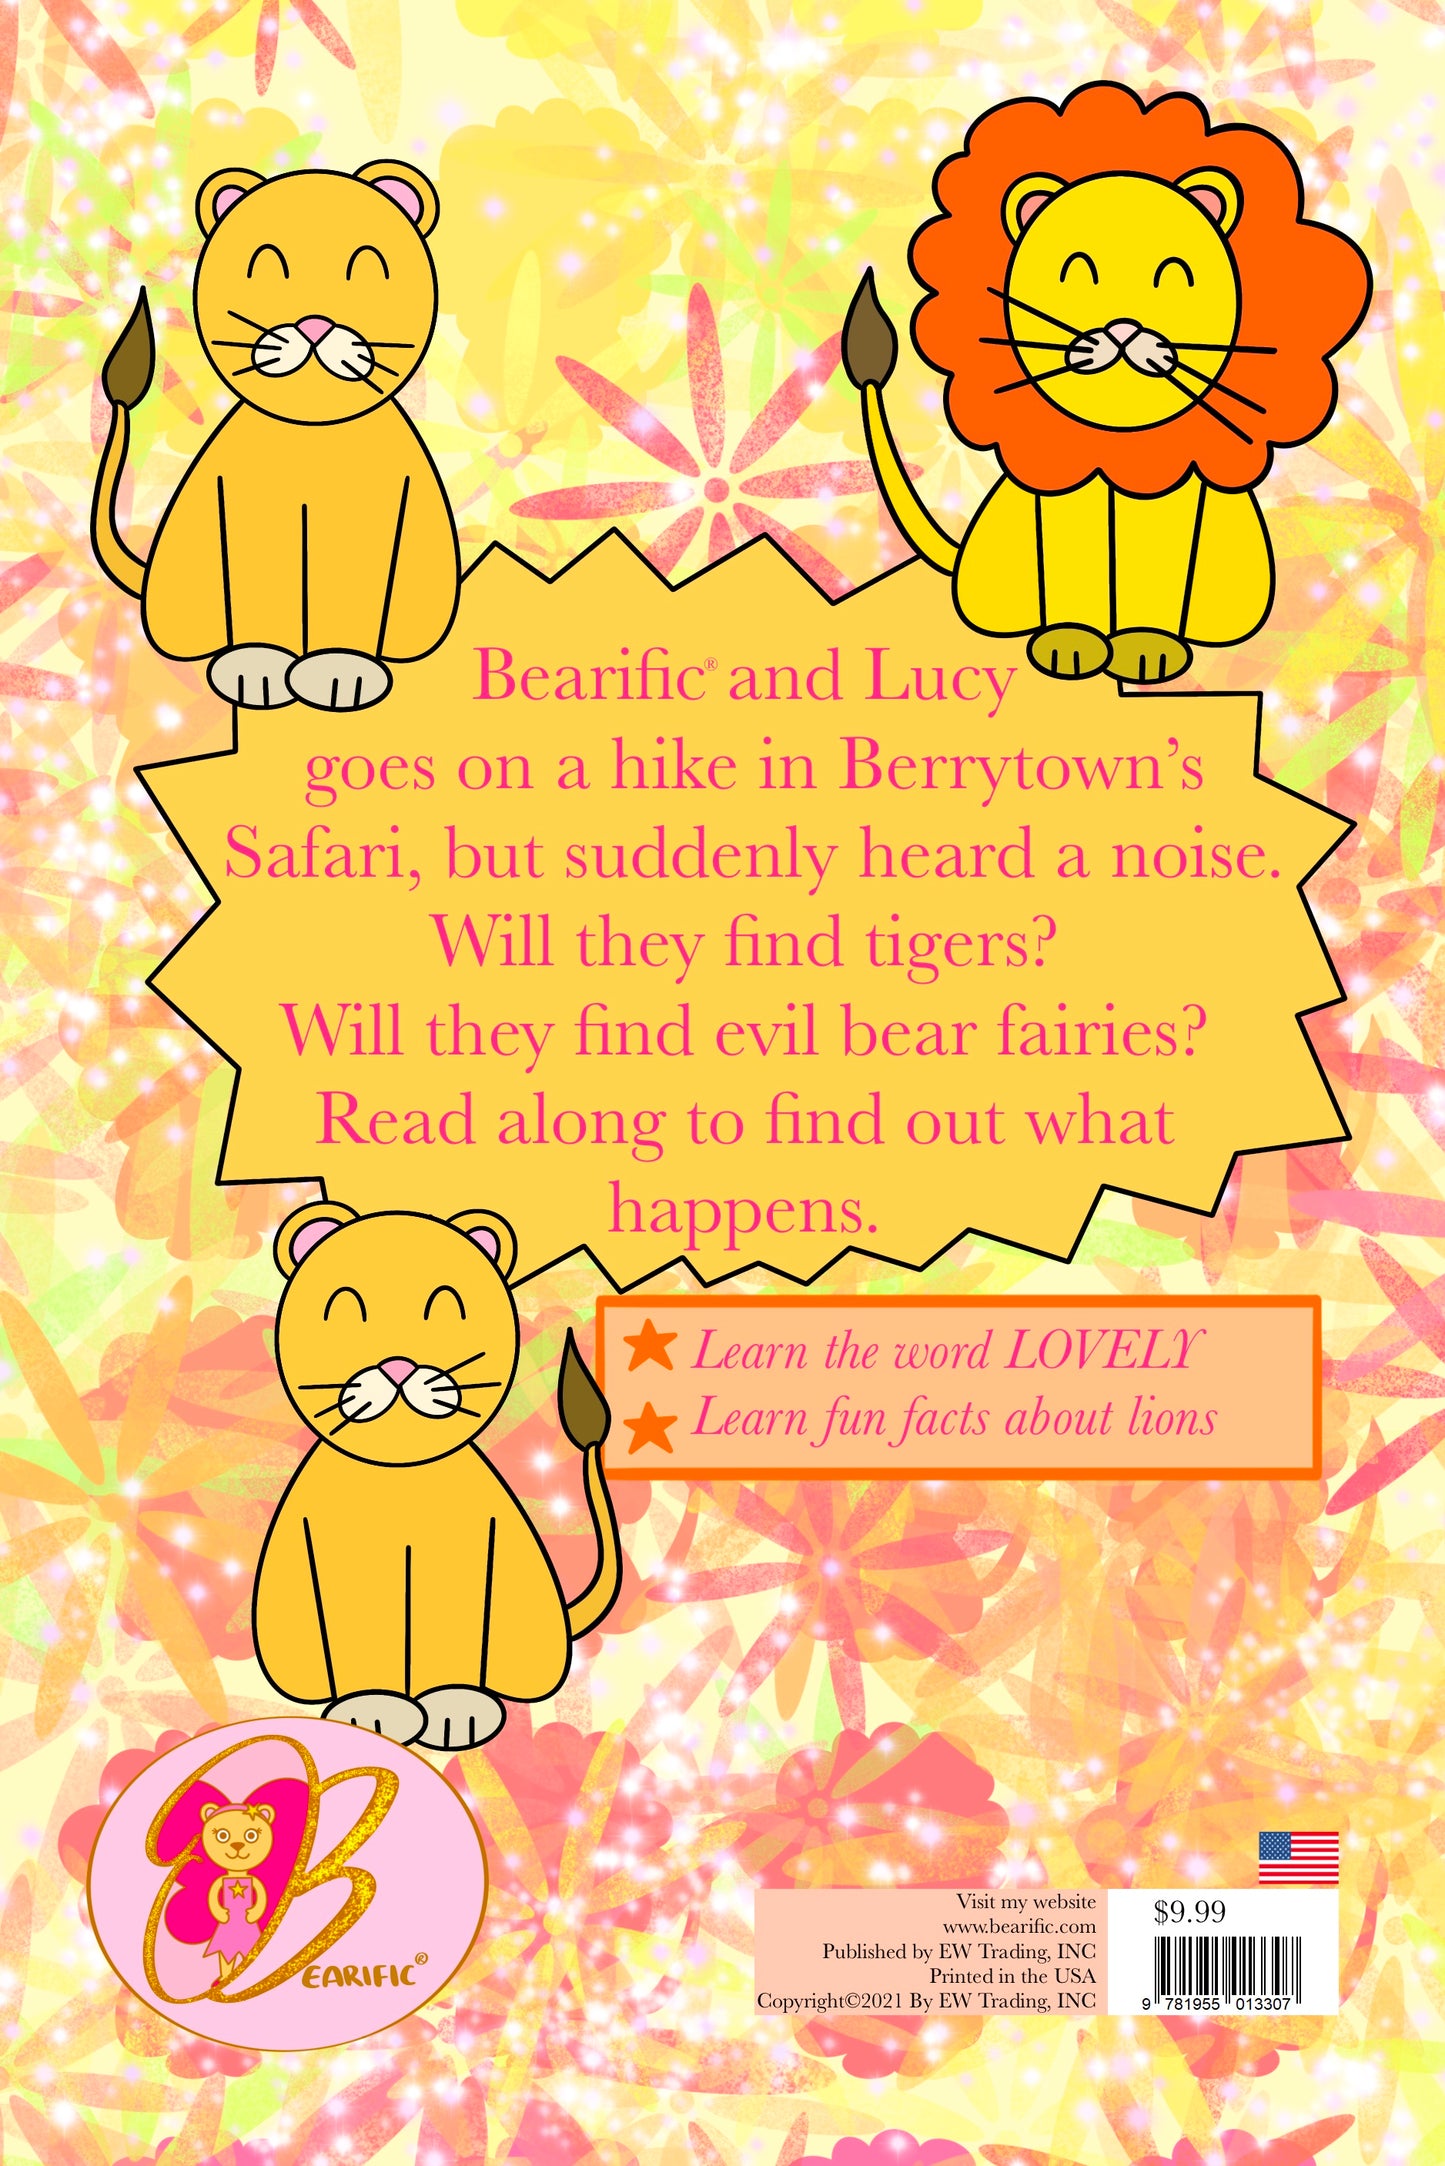 Bearific® and the Lovely Lions